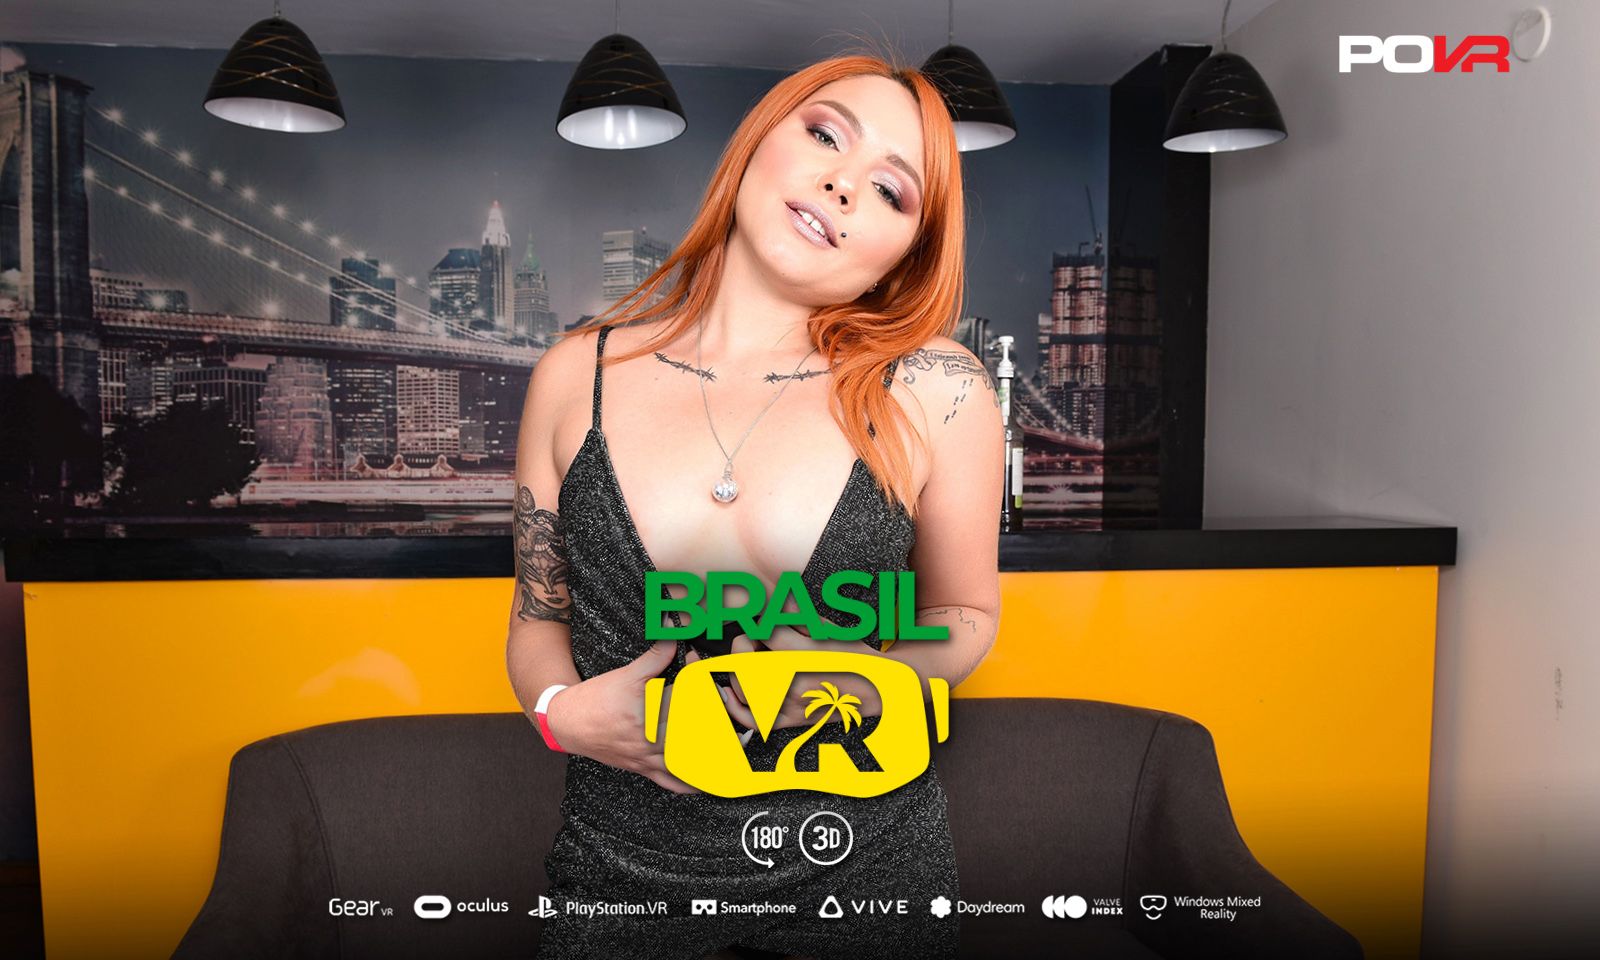 POVR Adds BrasilVR Content to Its Exclusive VR Offerings